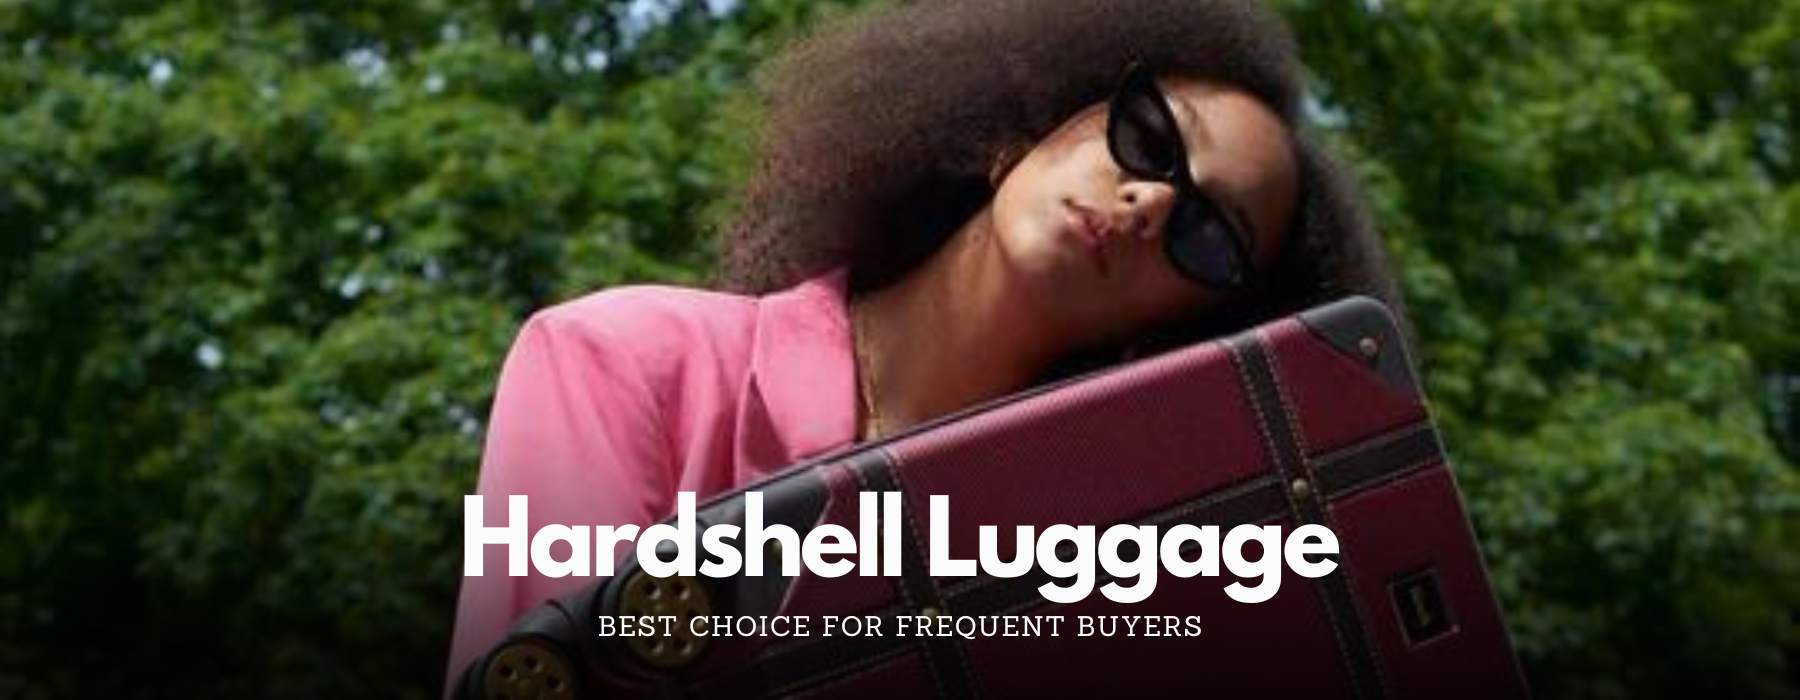 Why Hardshell Luggage Is the Best Choice for Frequent Flyers in the UK